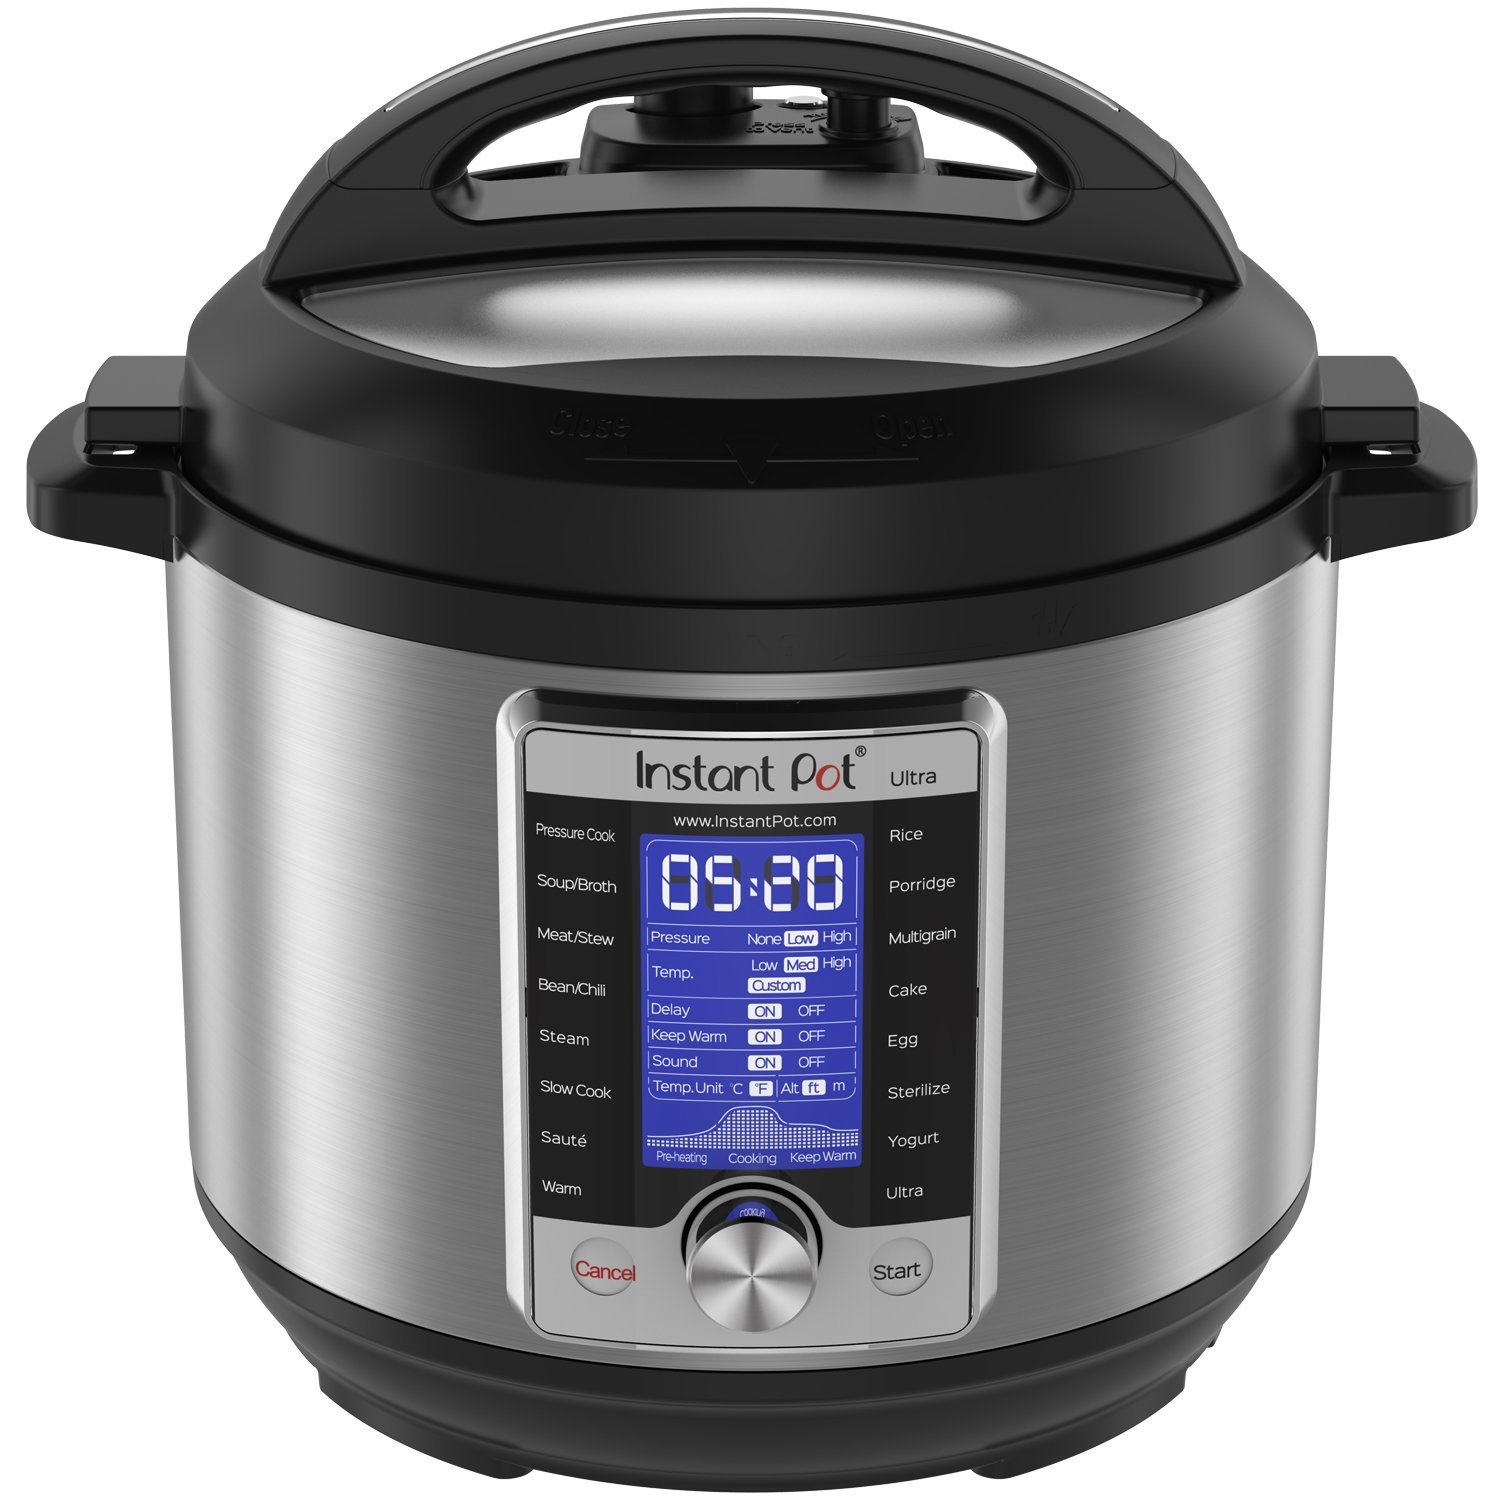 Instant Pot Ultra 6-qt 10-in-1 programmable pressure cooker for $85